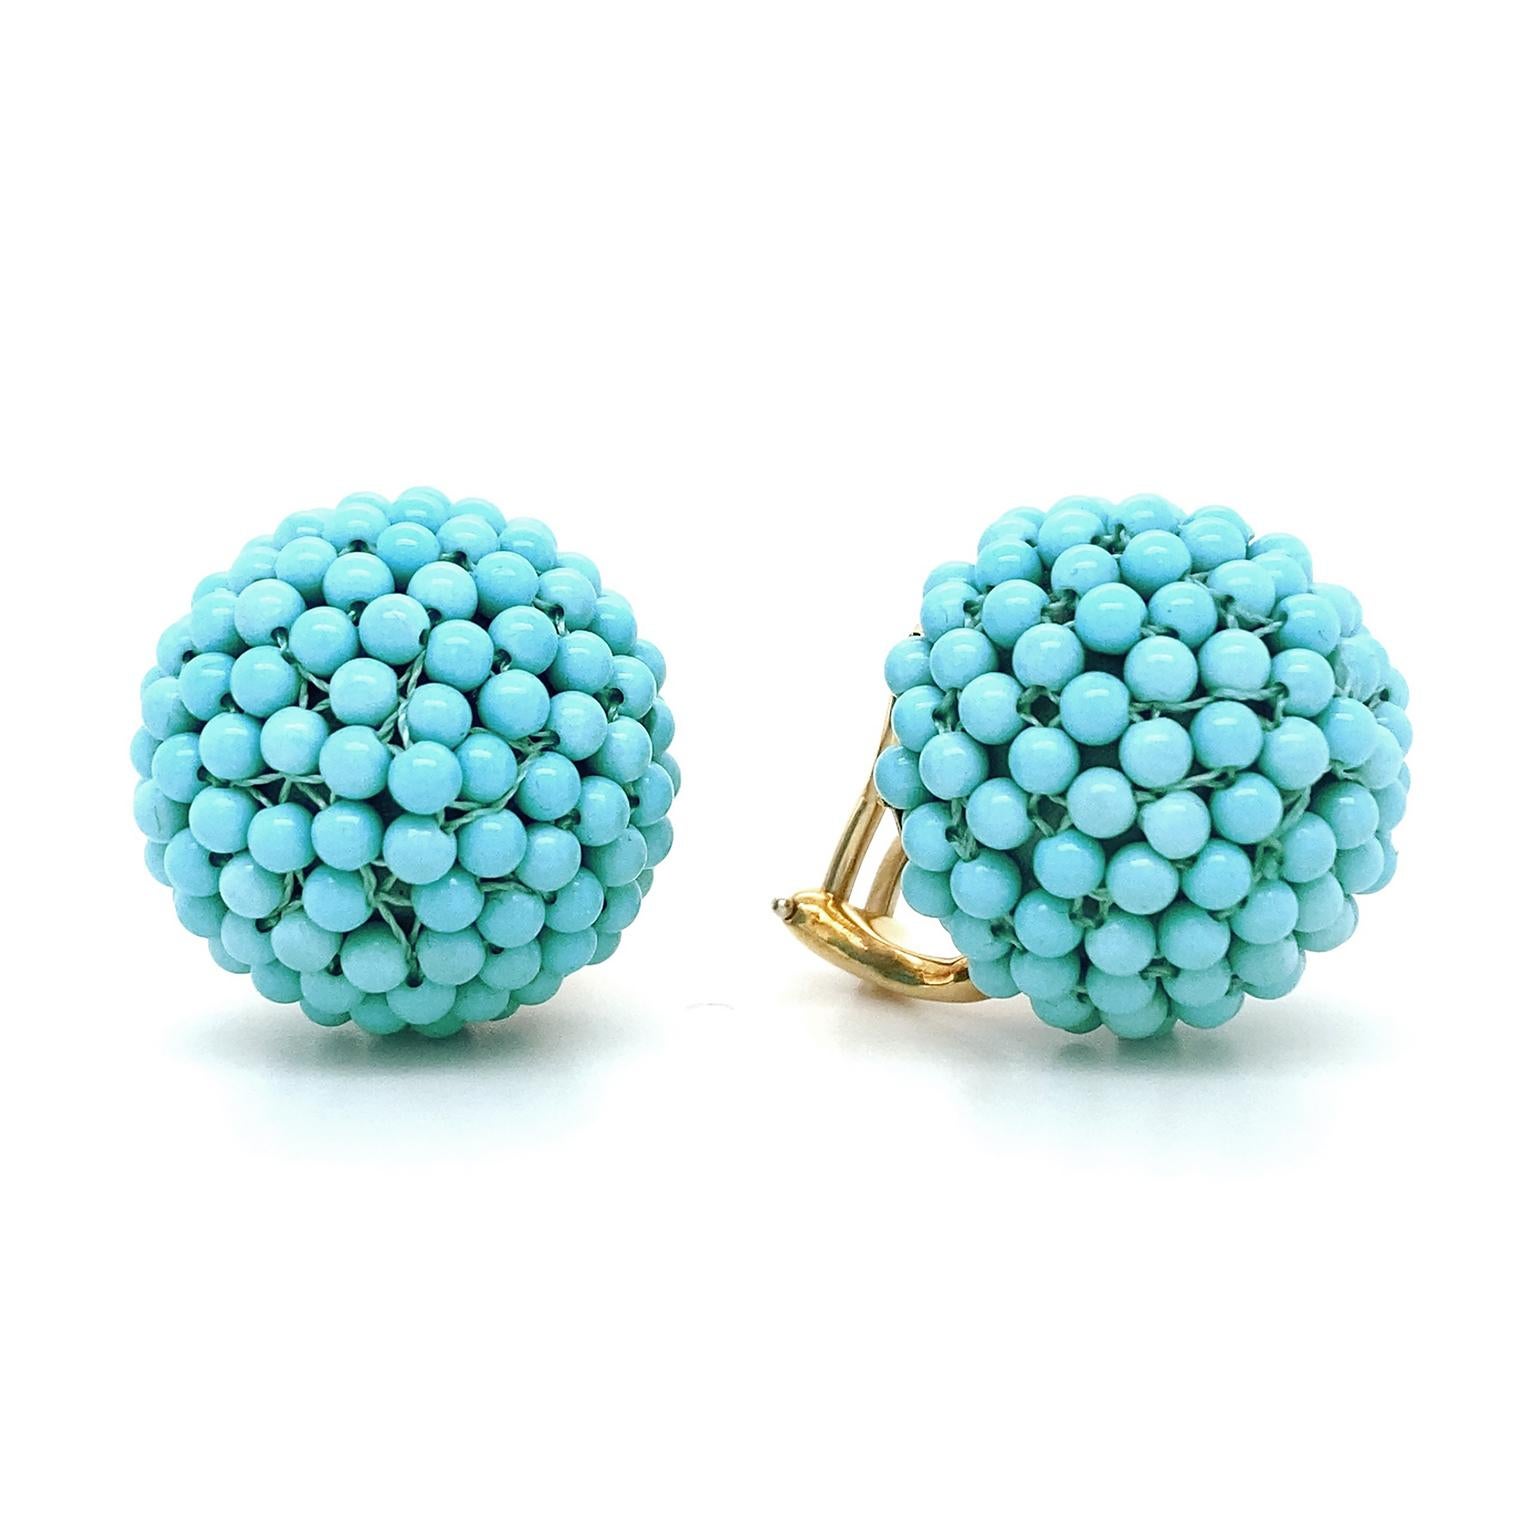 Intense sky-blue hues of turquoise are acclaimed in these earrings. Carved into small round beads, the gems are carefully strung densely together on a 23mm orb for a cohesive arrangement. 18k yellow gold clip-backs finish the earrings, which measure